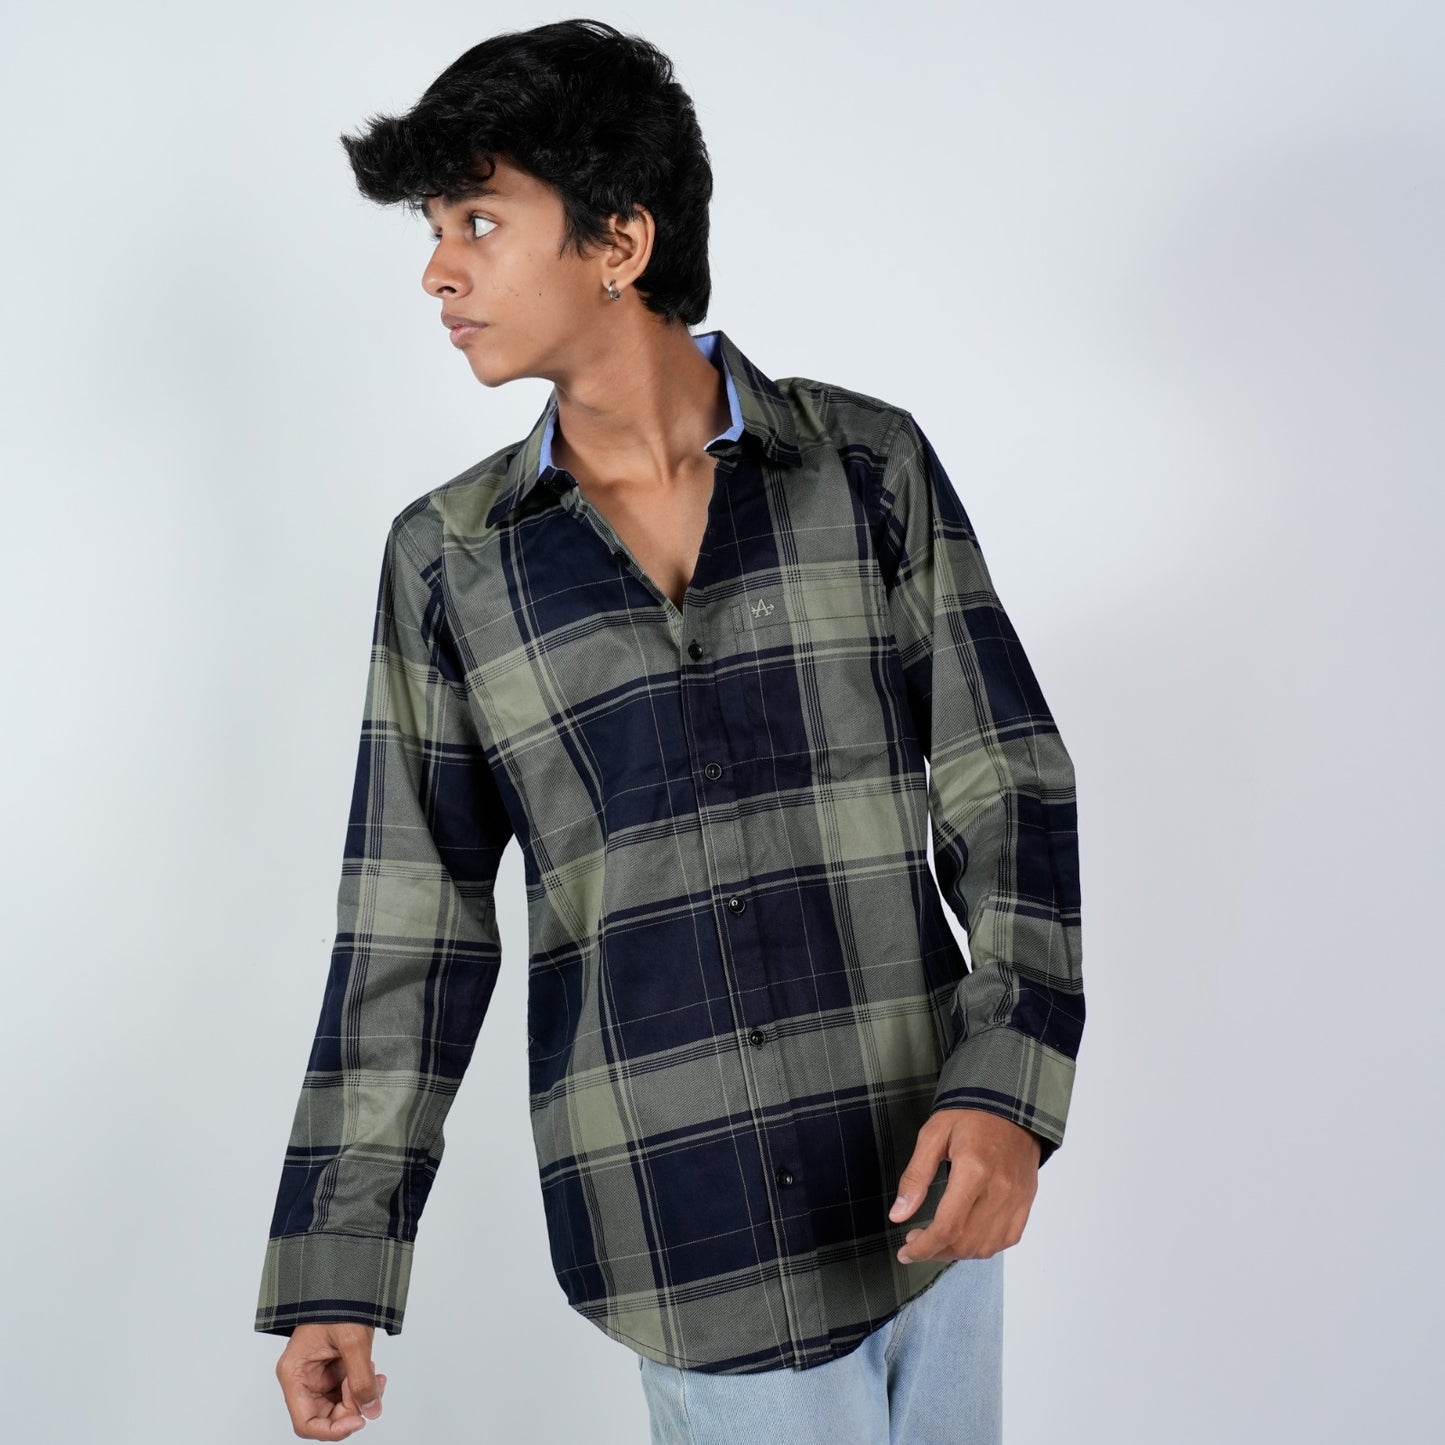 SONIBROS "Ocean Breeze Fusion: Blue and Green Check Printed Casual Shirt for Effortless Style"